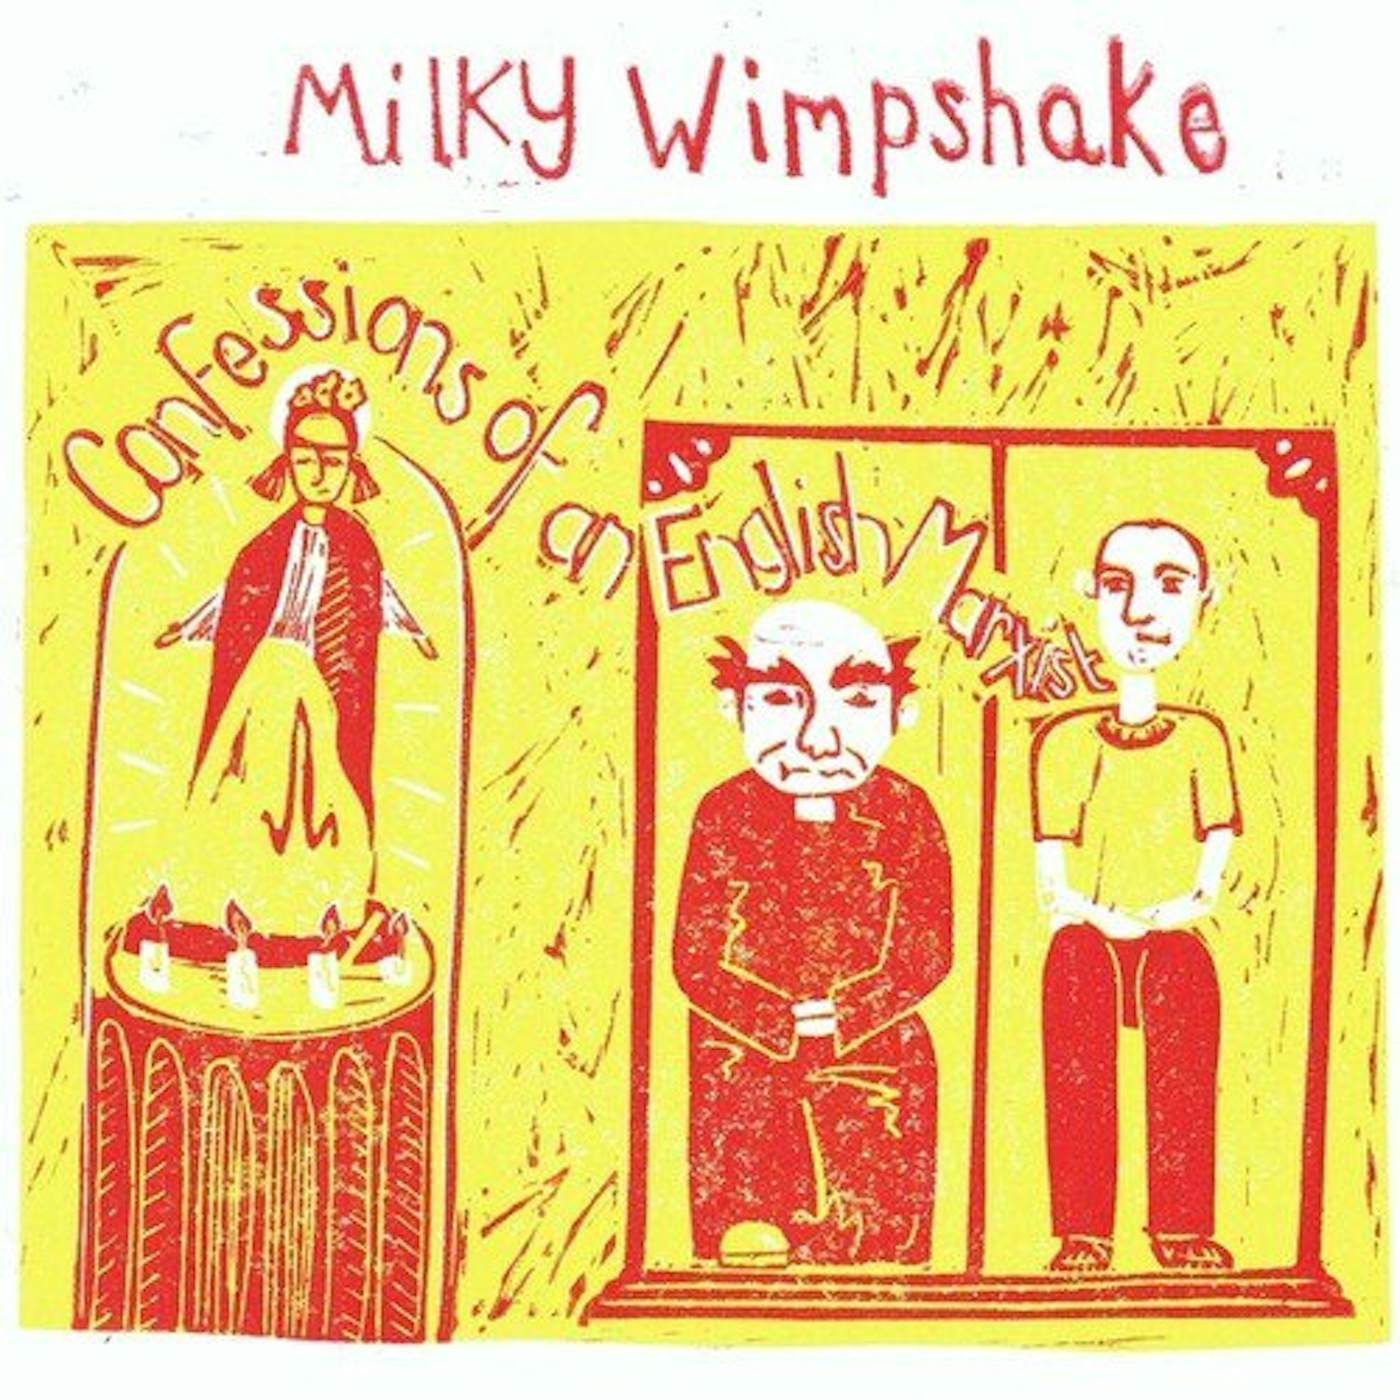 Milky Wimpshake Confessions of an English Marxist Vinyl Record